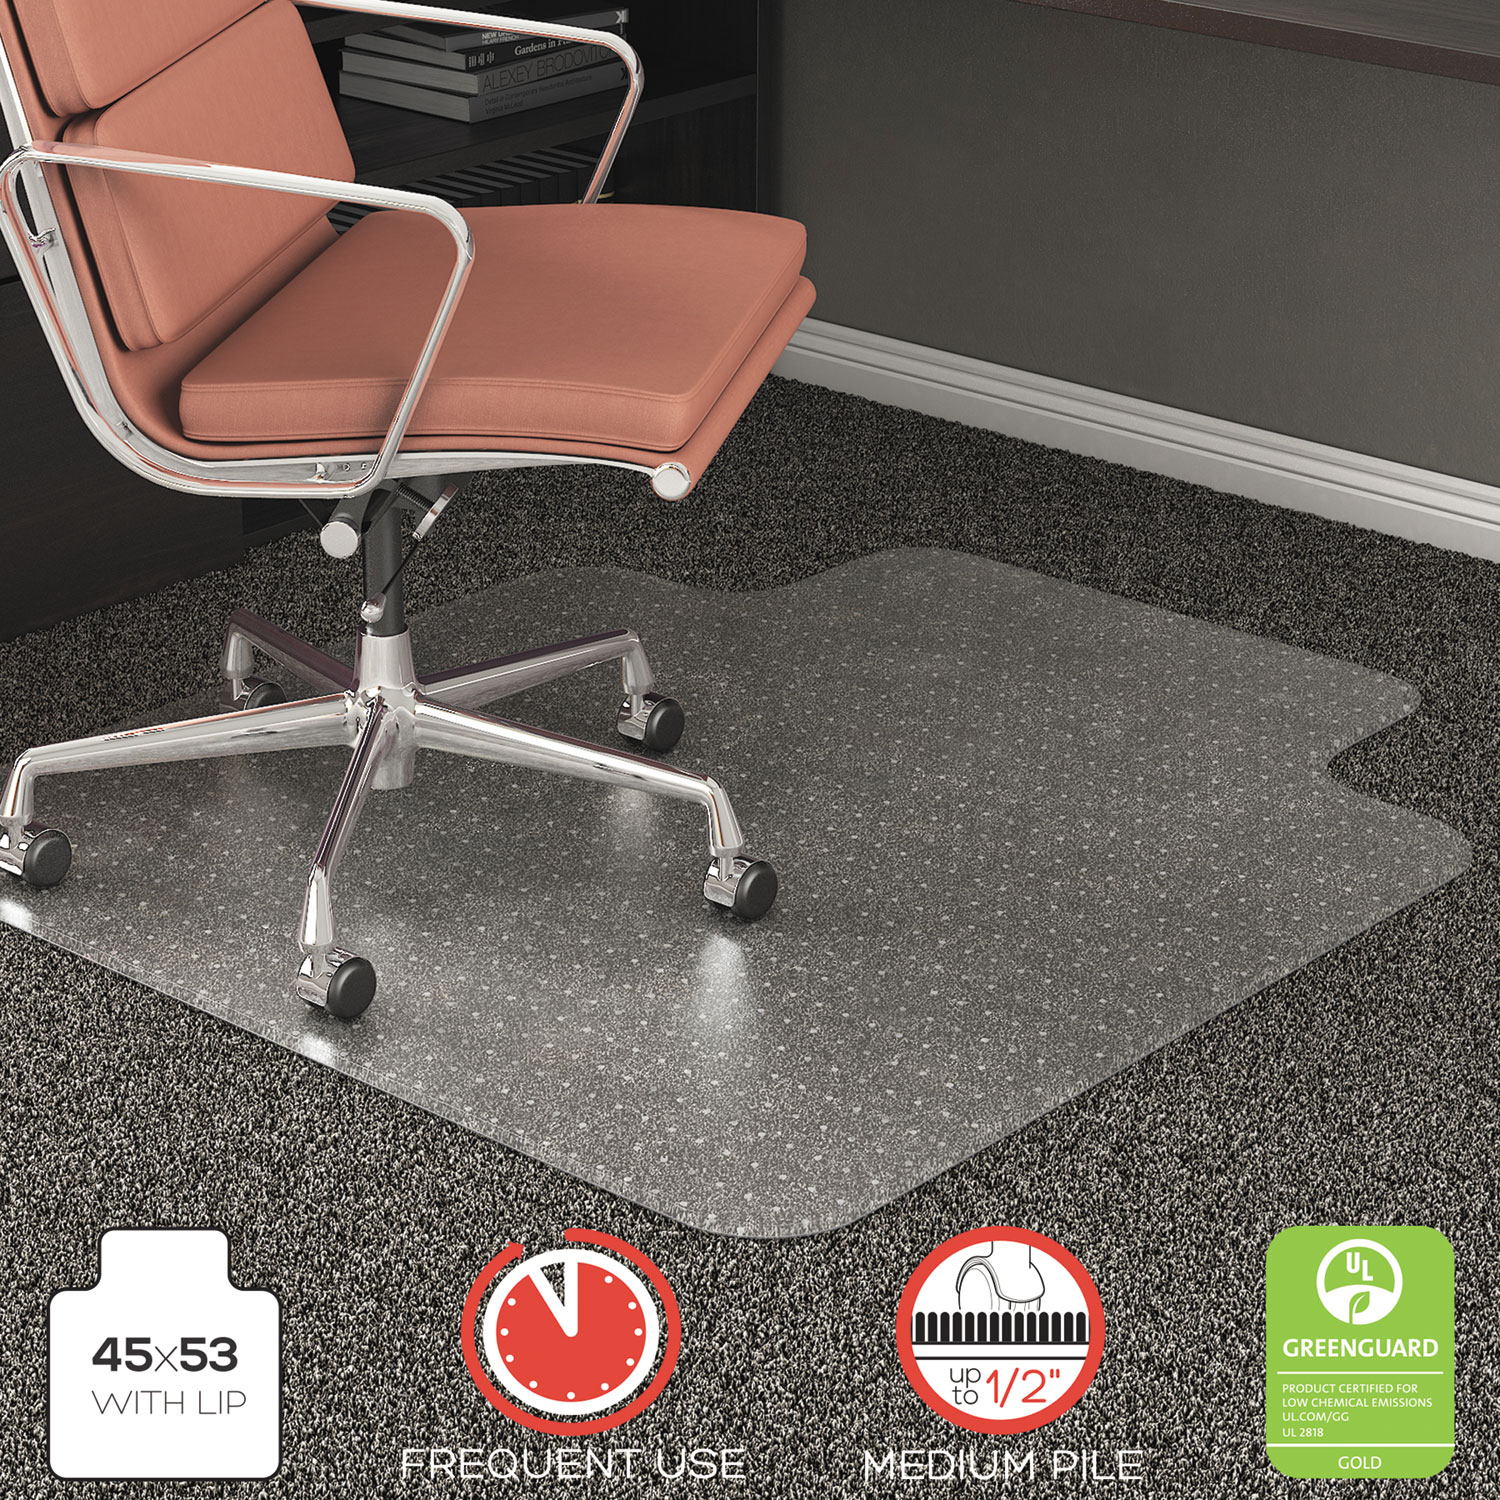  deflecto CM15233 RollaMat Frequent Use Chair Mat, Med Pile Carpet, Flat, 45 x 53, Wide Lipped, Clear (DEFCM15233) 